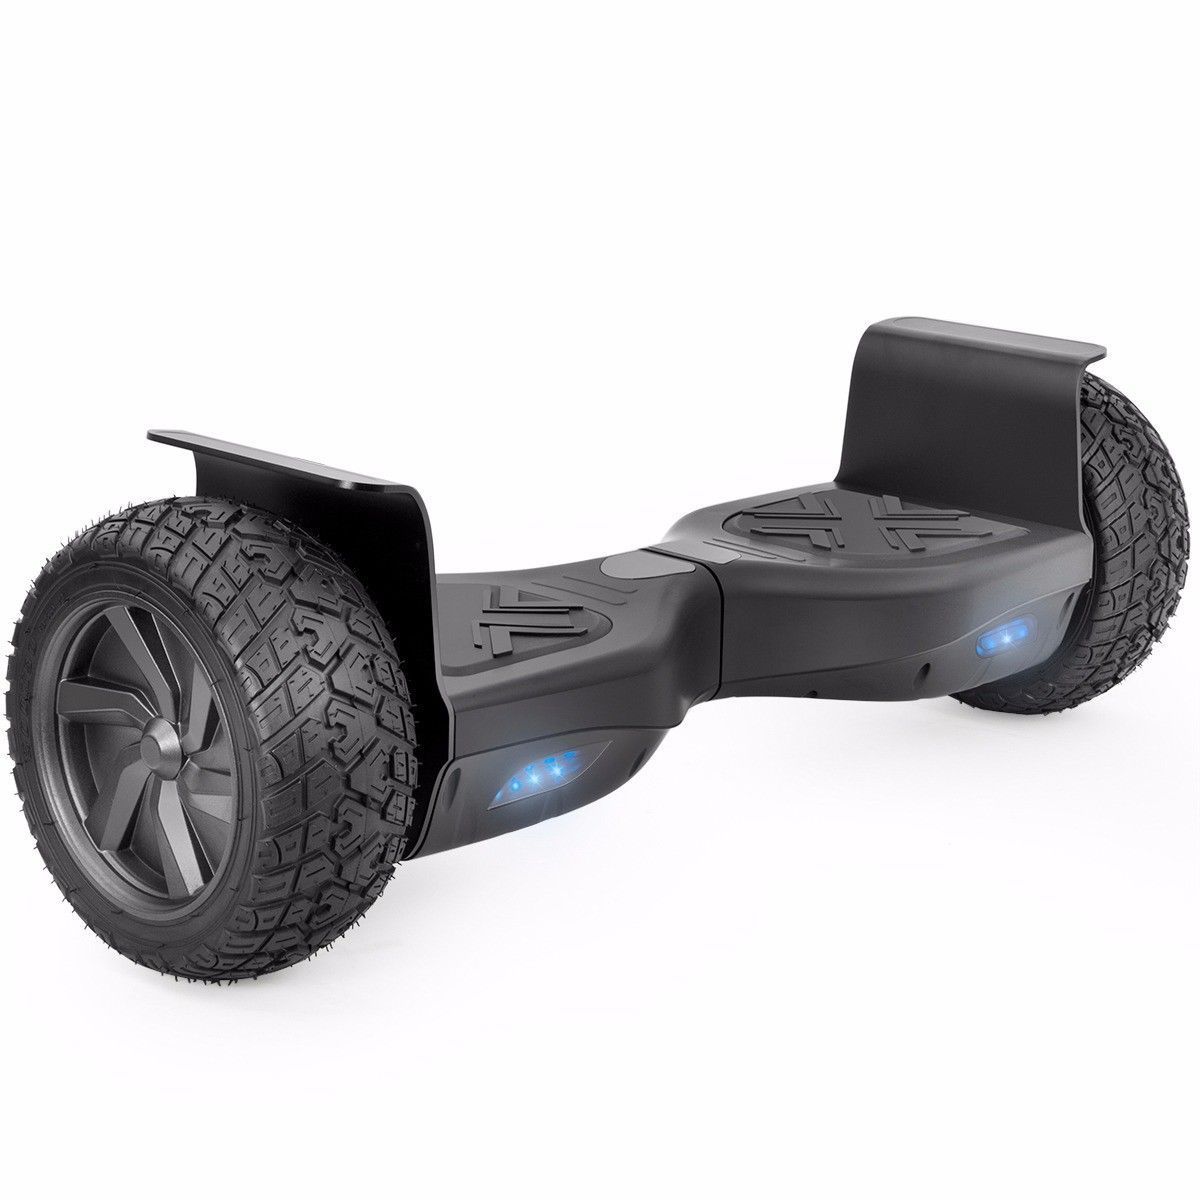 Black Heavy Duty Metal All Terrain Off Road Bluetooth Hoverboard 8.5" Scooter - $298.00